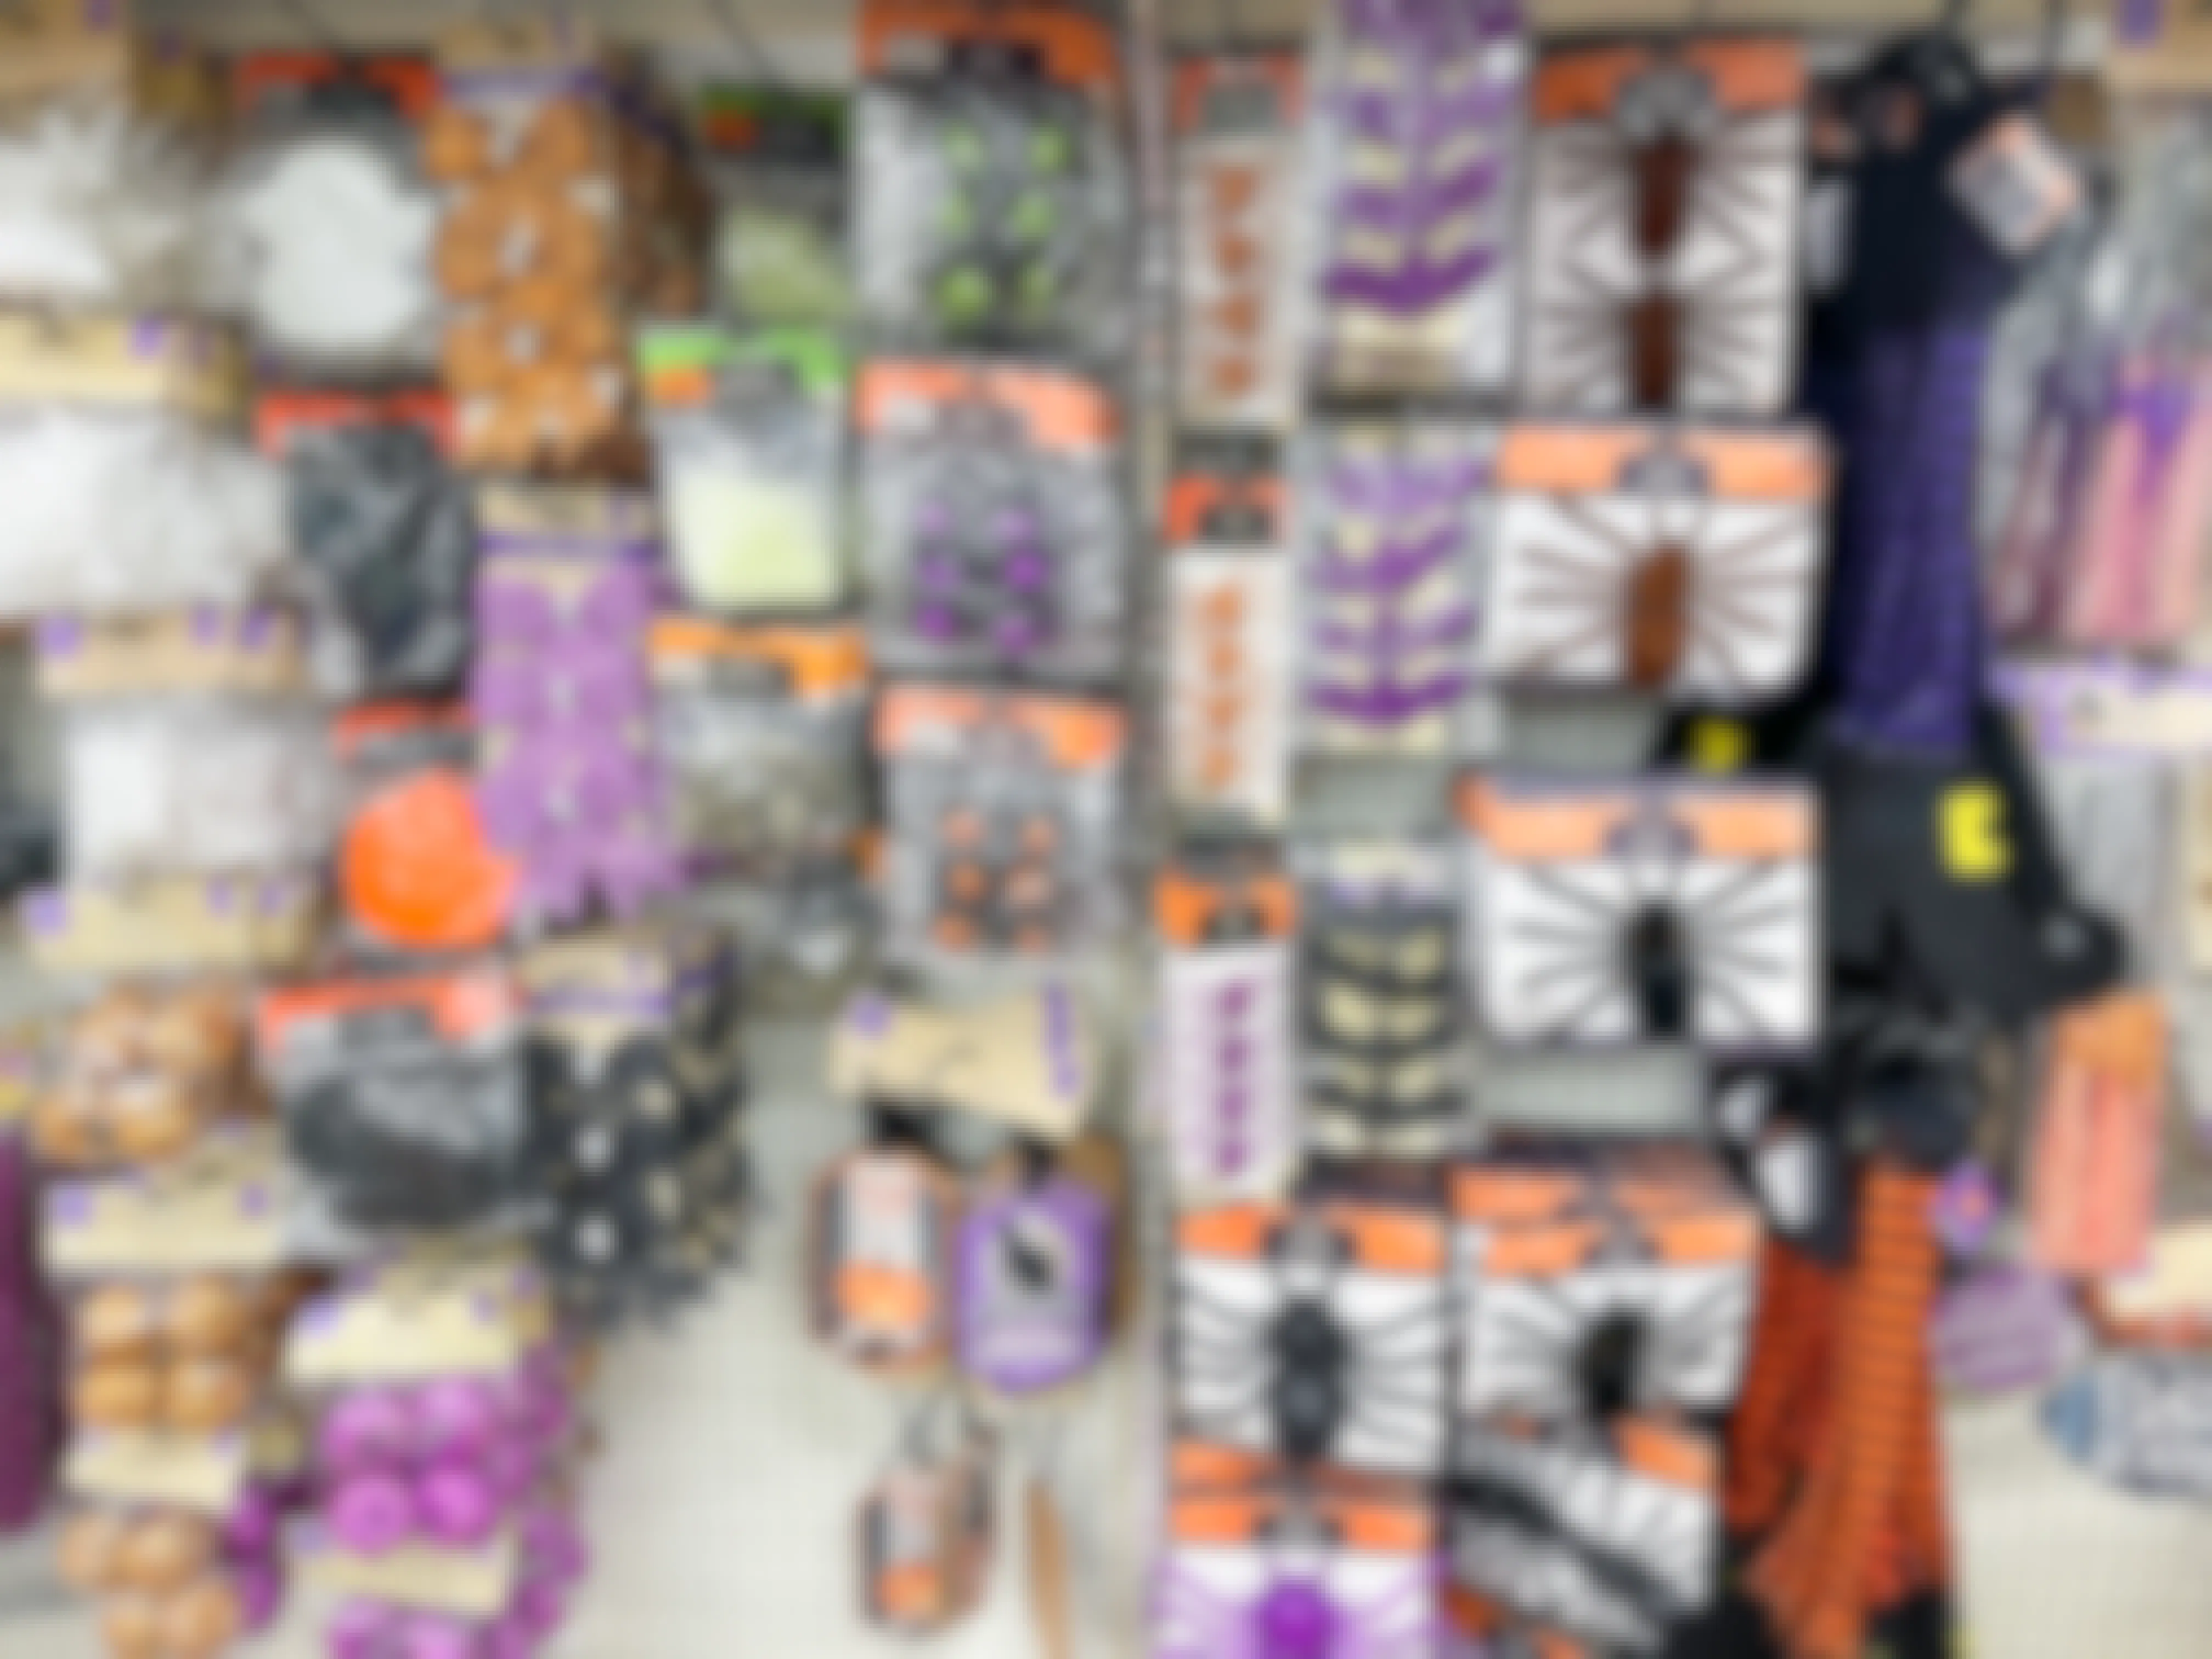 Craft supplies and Halloween decor for sale at dollar tree.